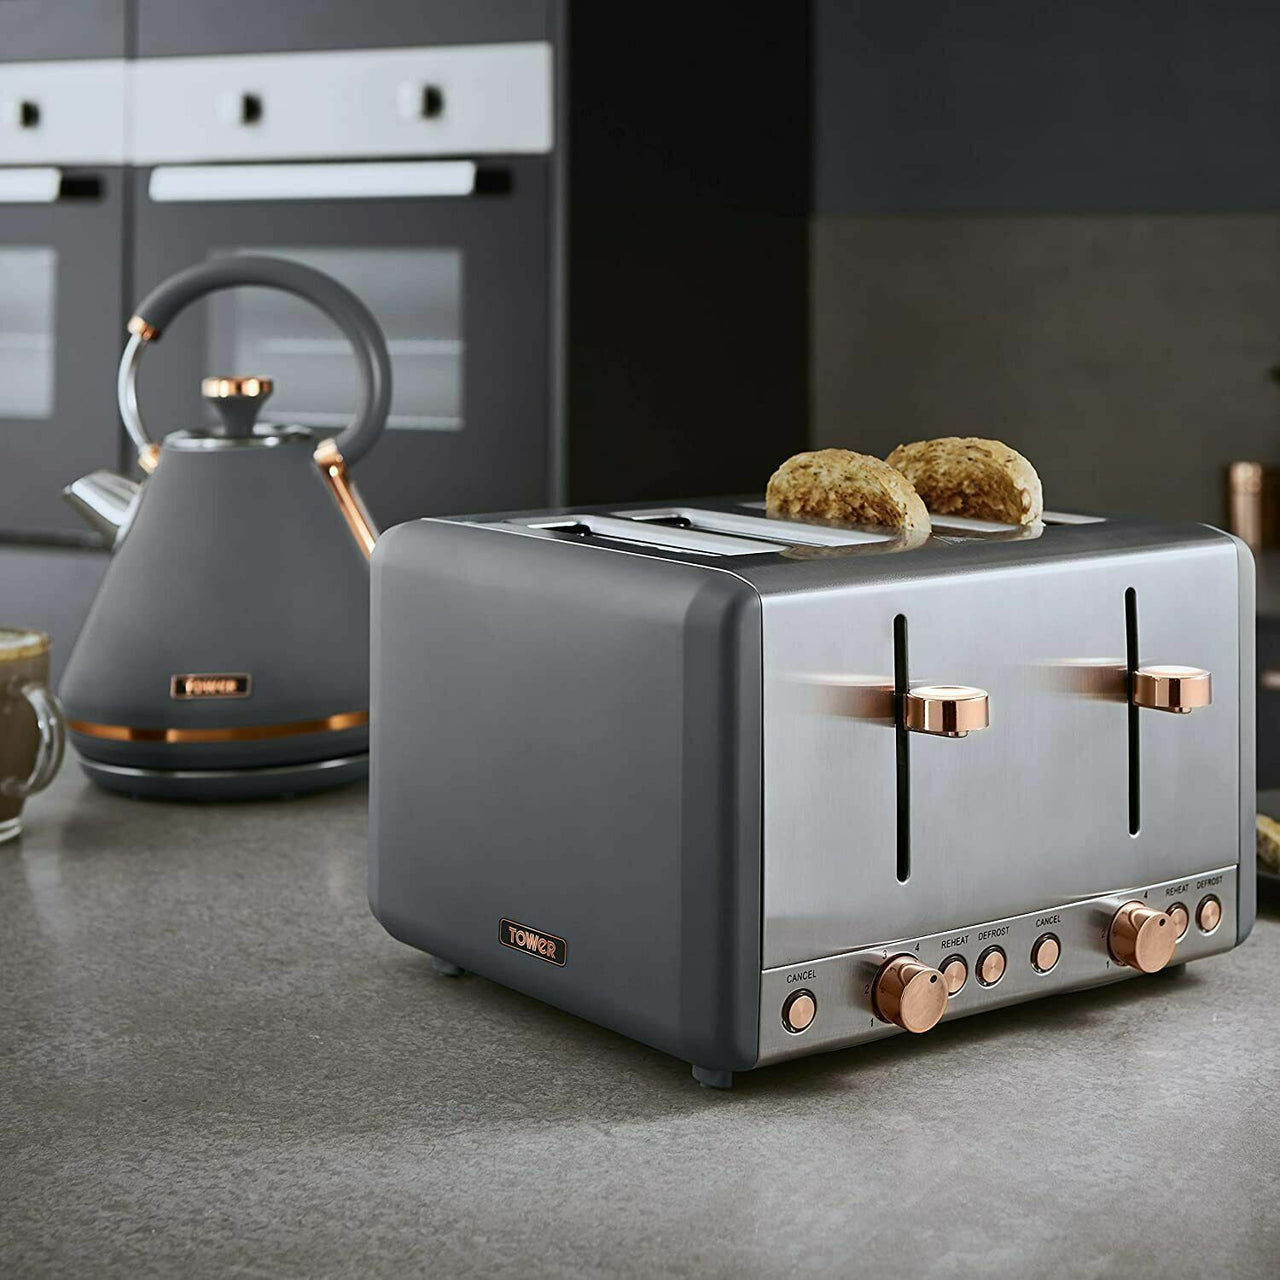 Tower Cavaletto Grey/Rose Gold Set of 9 Kettle, 4 Slice Toaster, Microwave Bread Bin, Canisters, Mug Tree and Towel Pole Holder